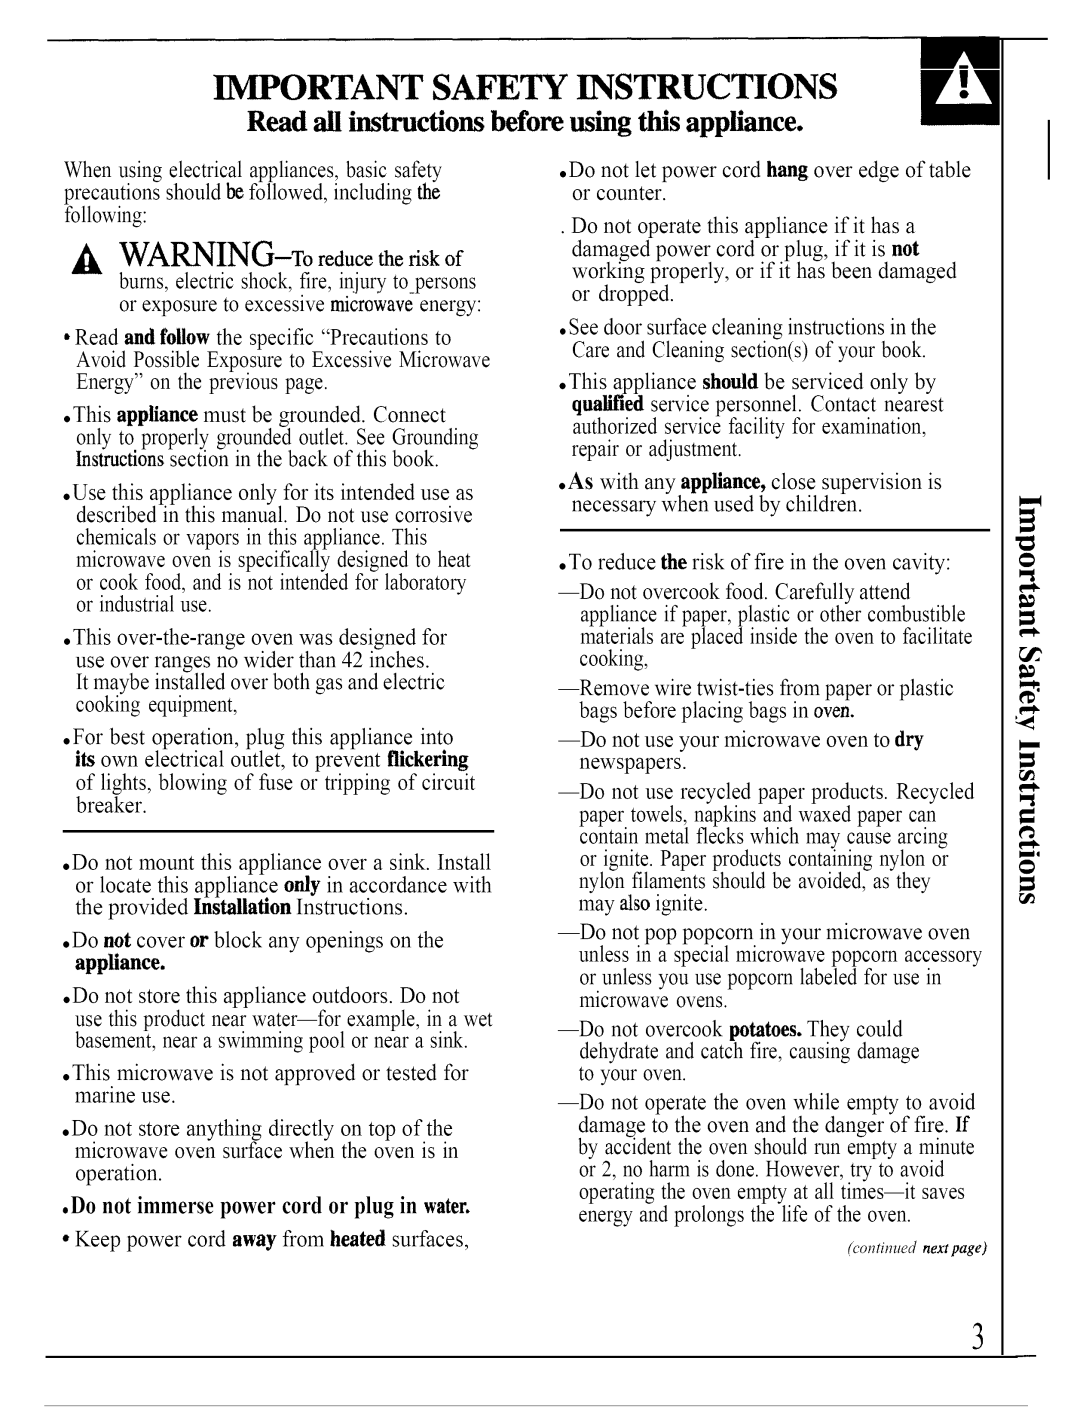 GE JVM140K operating instructions Important Safety Instructions, Read all instructions before using this appliance 